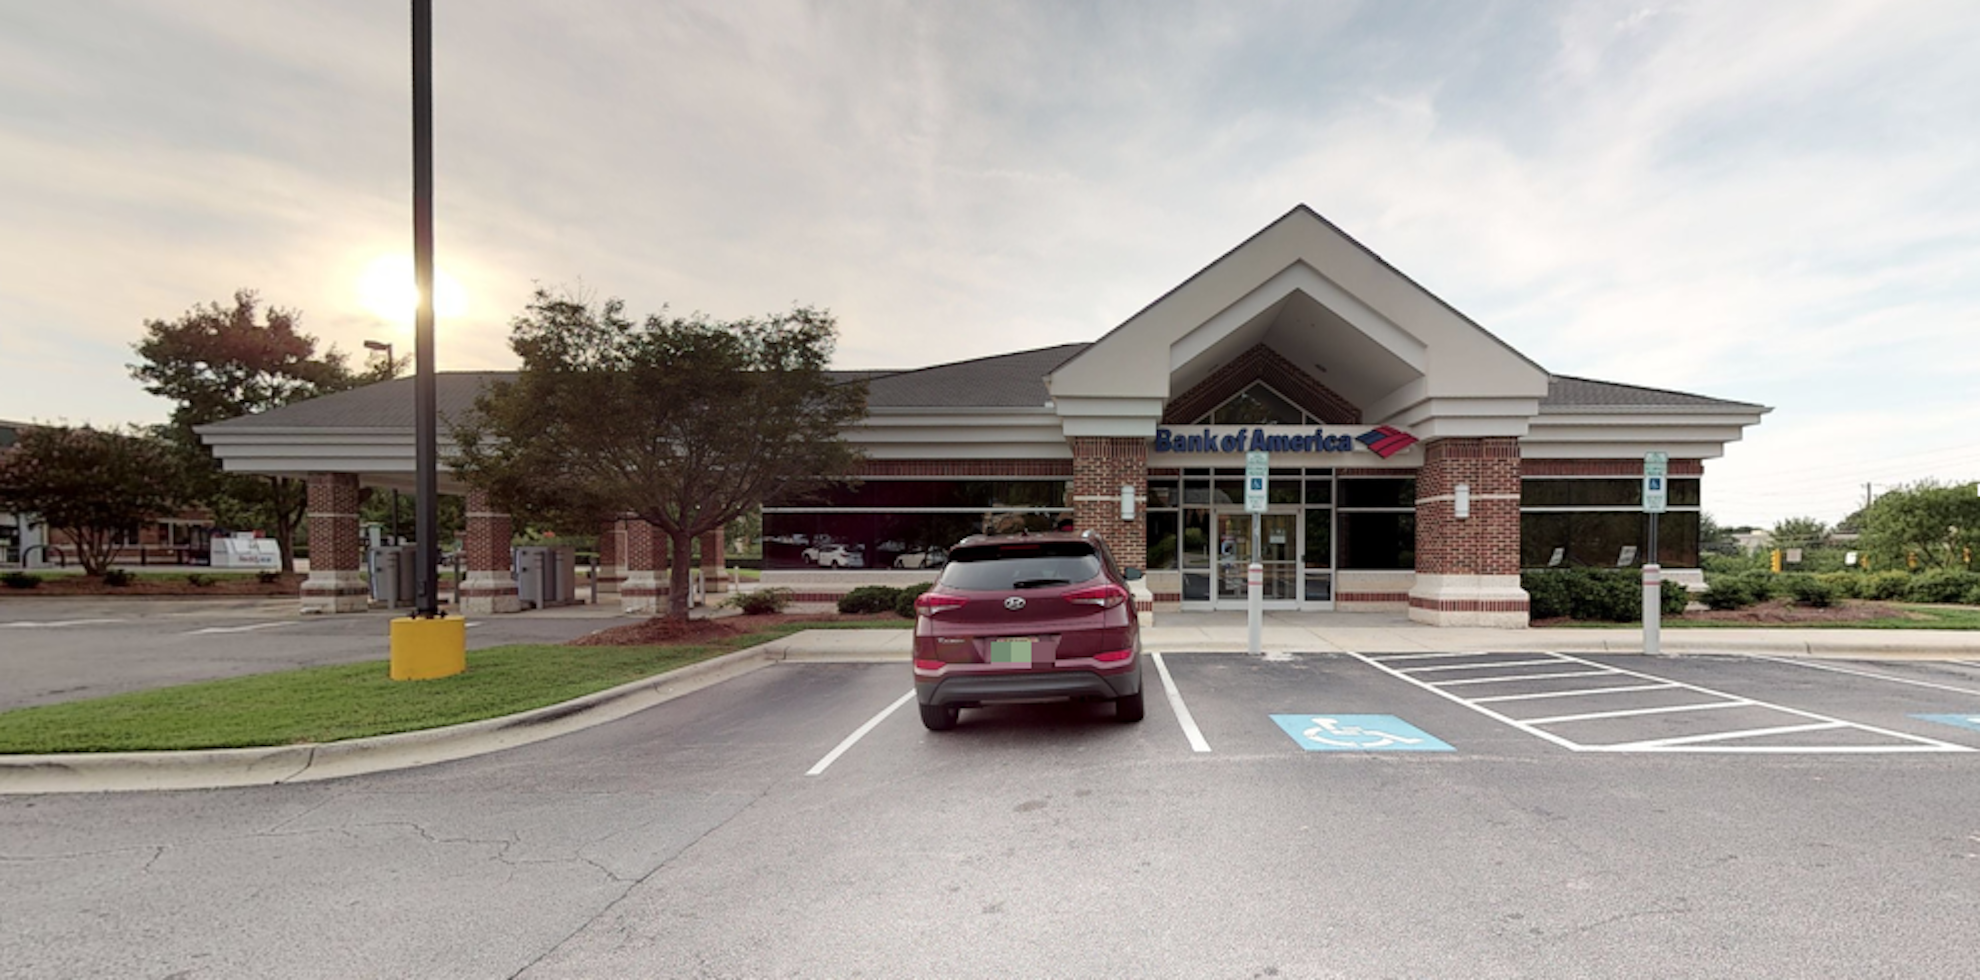 Bank of America financial center with drive-thru ATM | 5496 Apex Peakway, Apex, NC 27502